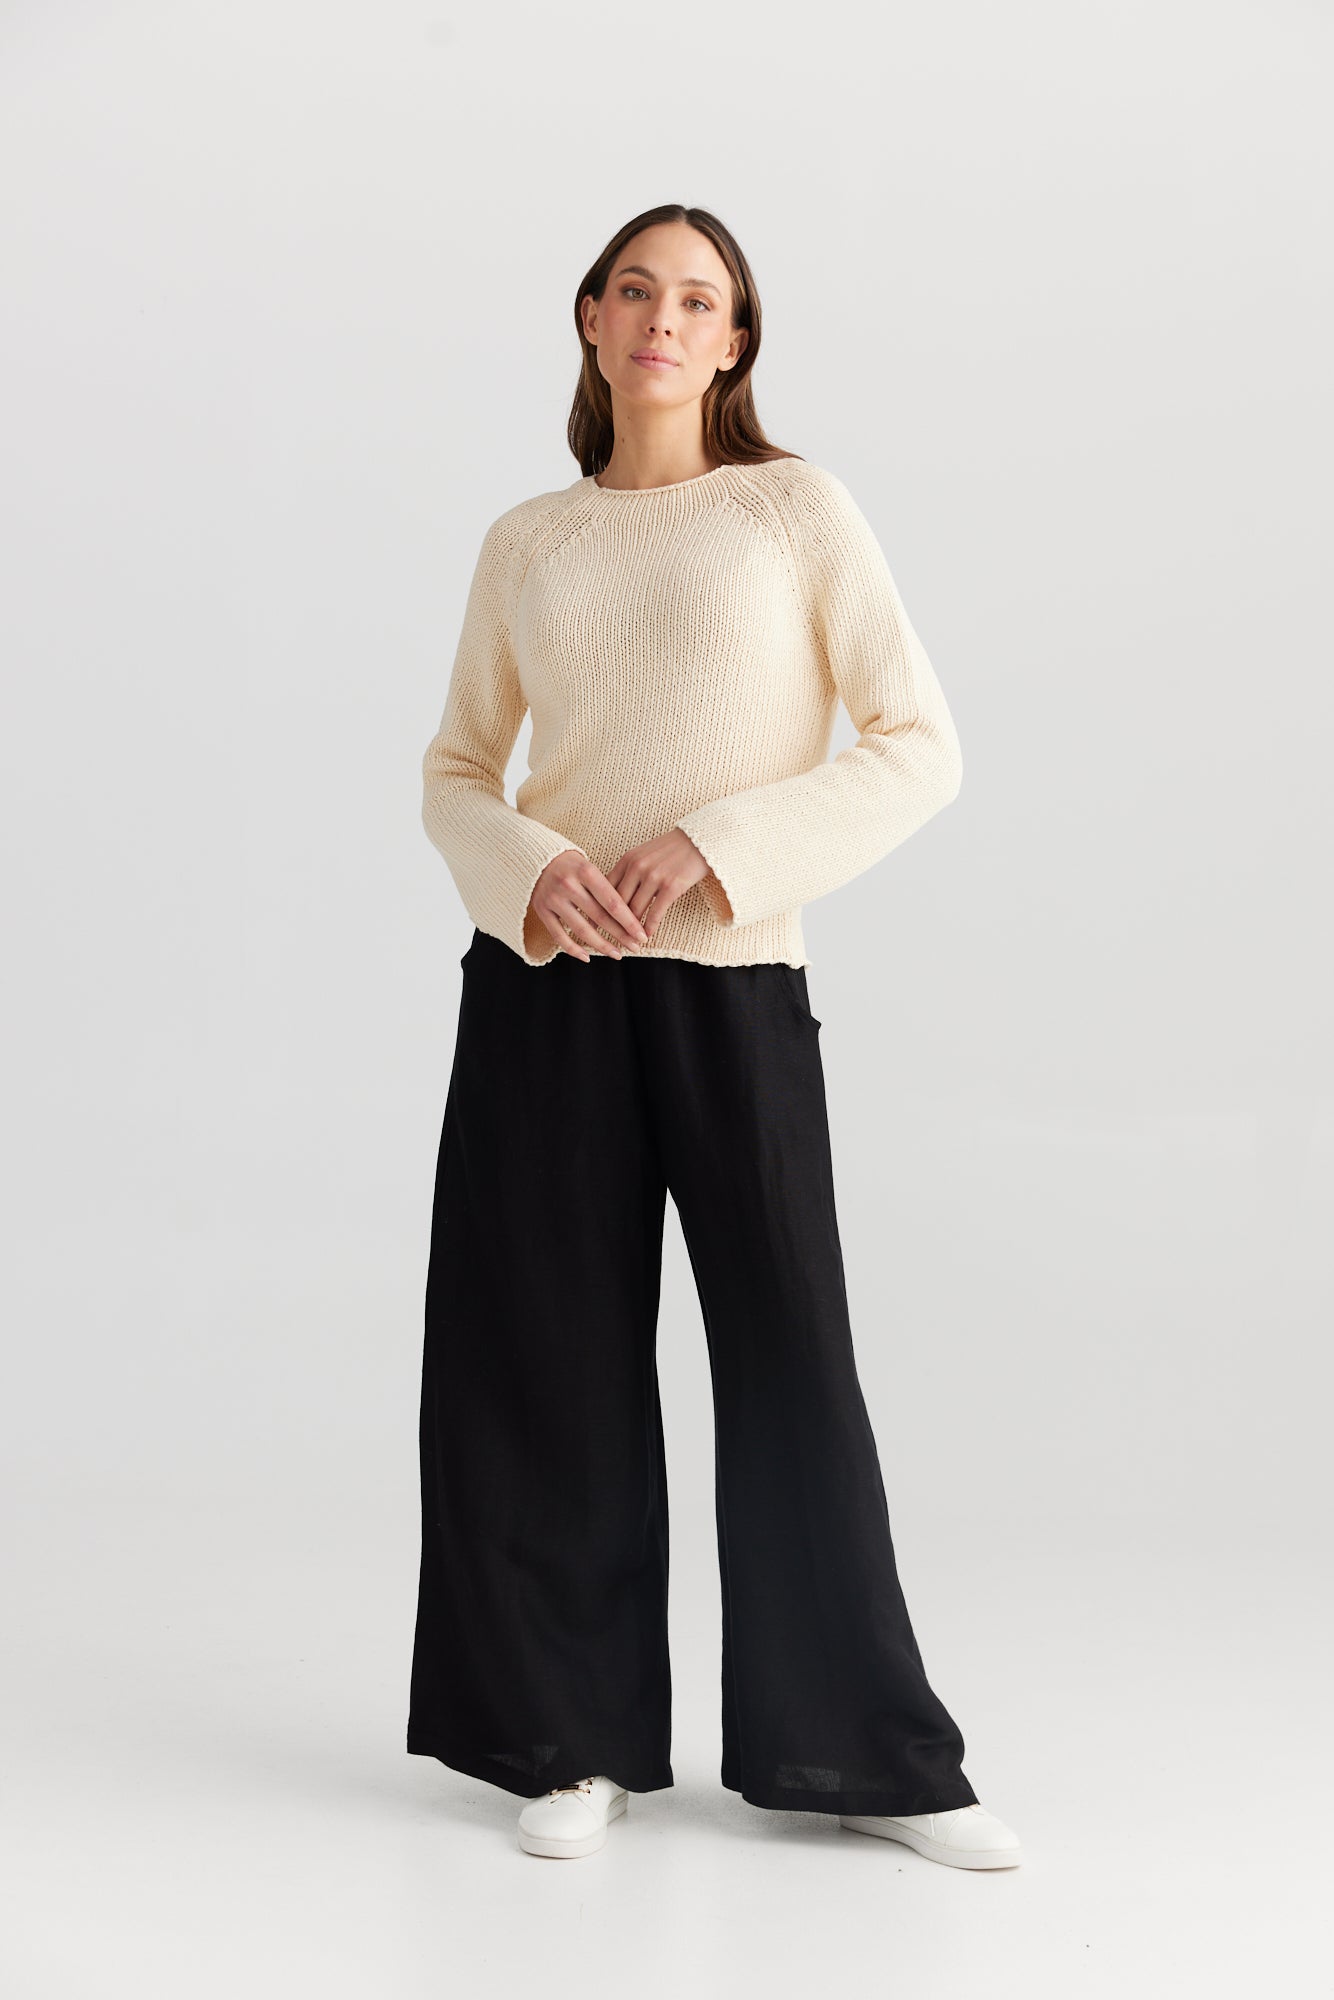 Esse Knit - Natural-Knitwear & Jumpers-The Shanty Corporation-The Bay Room